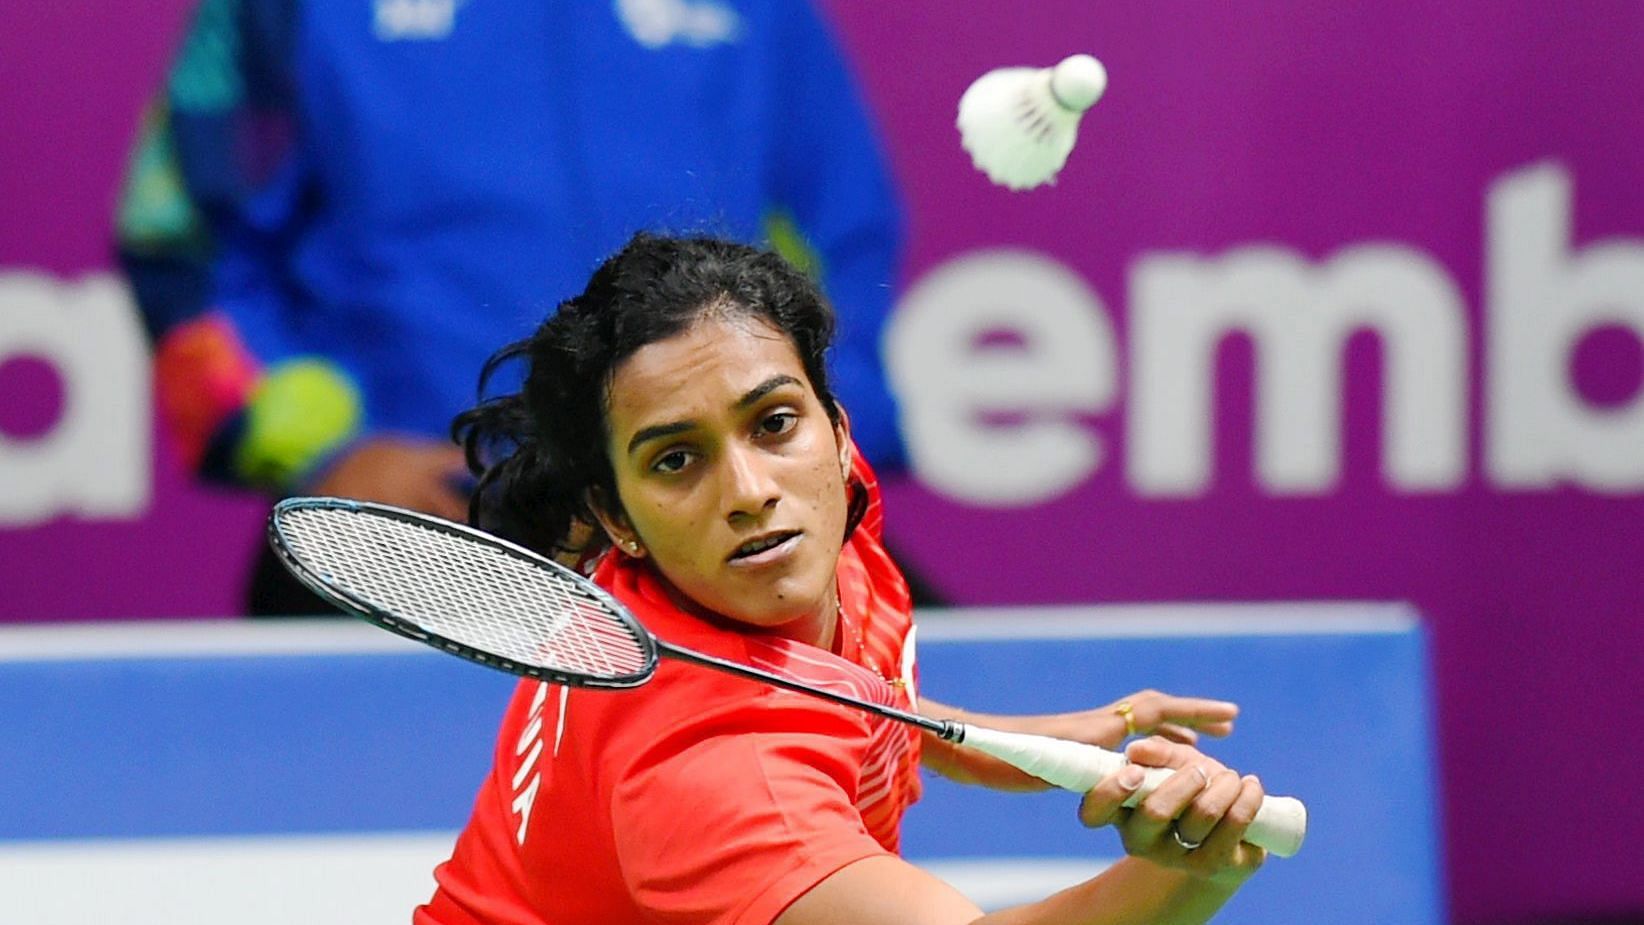 PV Sindhu has changed her decision and will now play in the Thomas and Uber Cup that starts on 3 October.